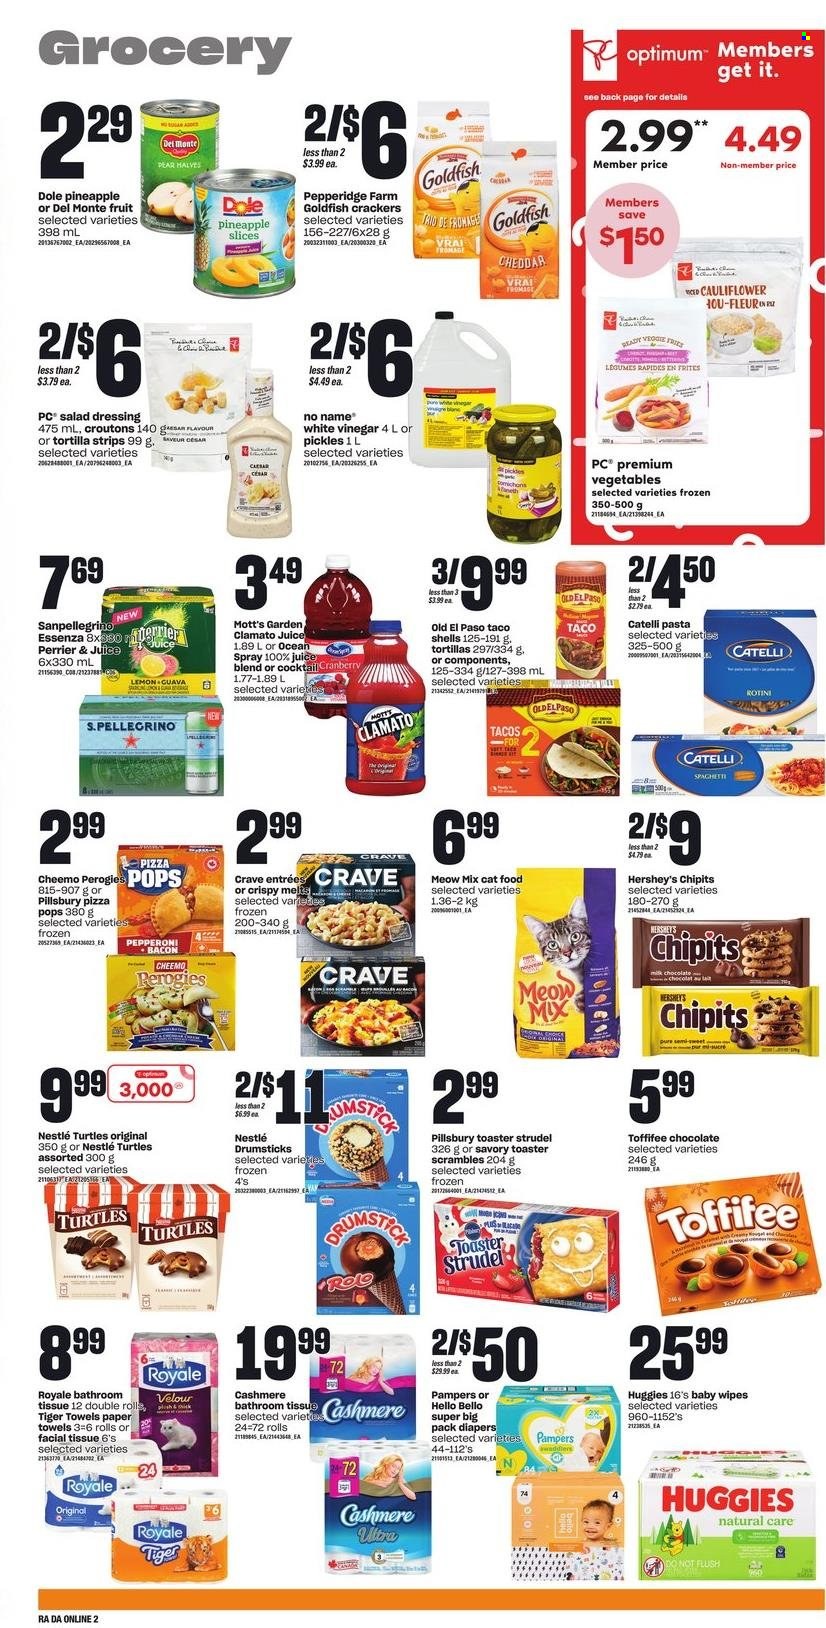 thumbnail - Dominion Flyer - November 24, 2022 - November 30, 2022 - Sales products - tortillas, strudel, Old El Paso, tacos, Dole, guava, Mott's, No Name, spaghetti, pizza, pasta, Pillsbury, bacon, pepperoni, Hershey's, milk chocolate, chocolate, Goldfish, croutons, pickles, Del Monte, salad dressing, dressing, vinegar, juice, Clamato, Perrier, San Pellegrino, wipes, baby wipes, nappies, bath tissue, kitchen towels, paper towels, animal food, turtles, cat food, Optimum, Meow Mix, radio, Nestlé, Huggies, Pampers. Page 8.